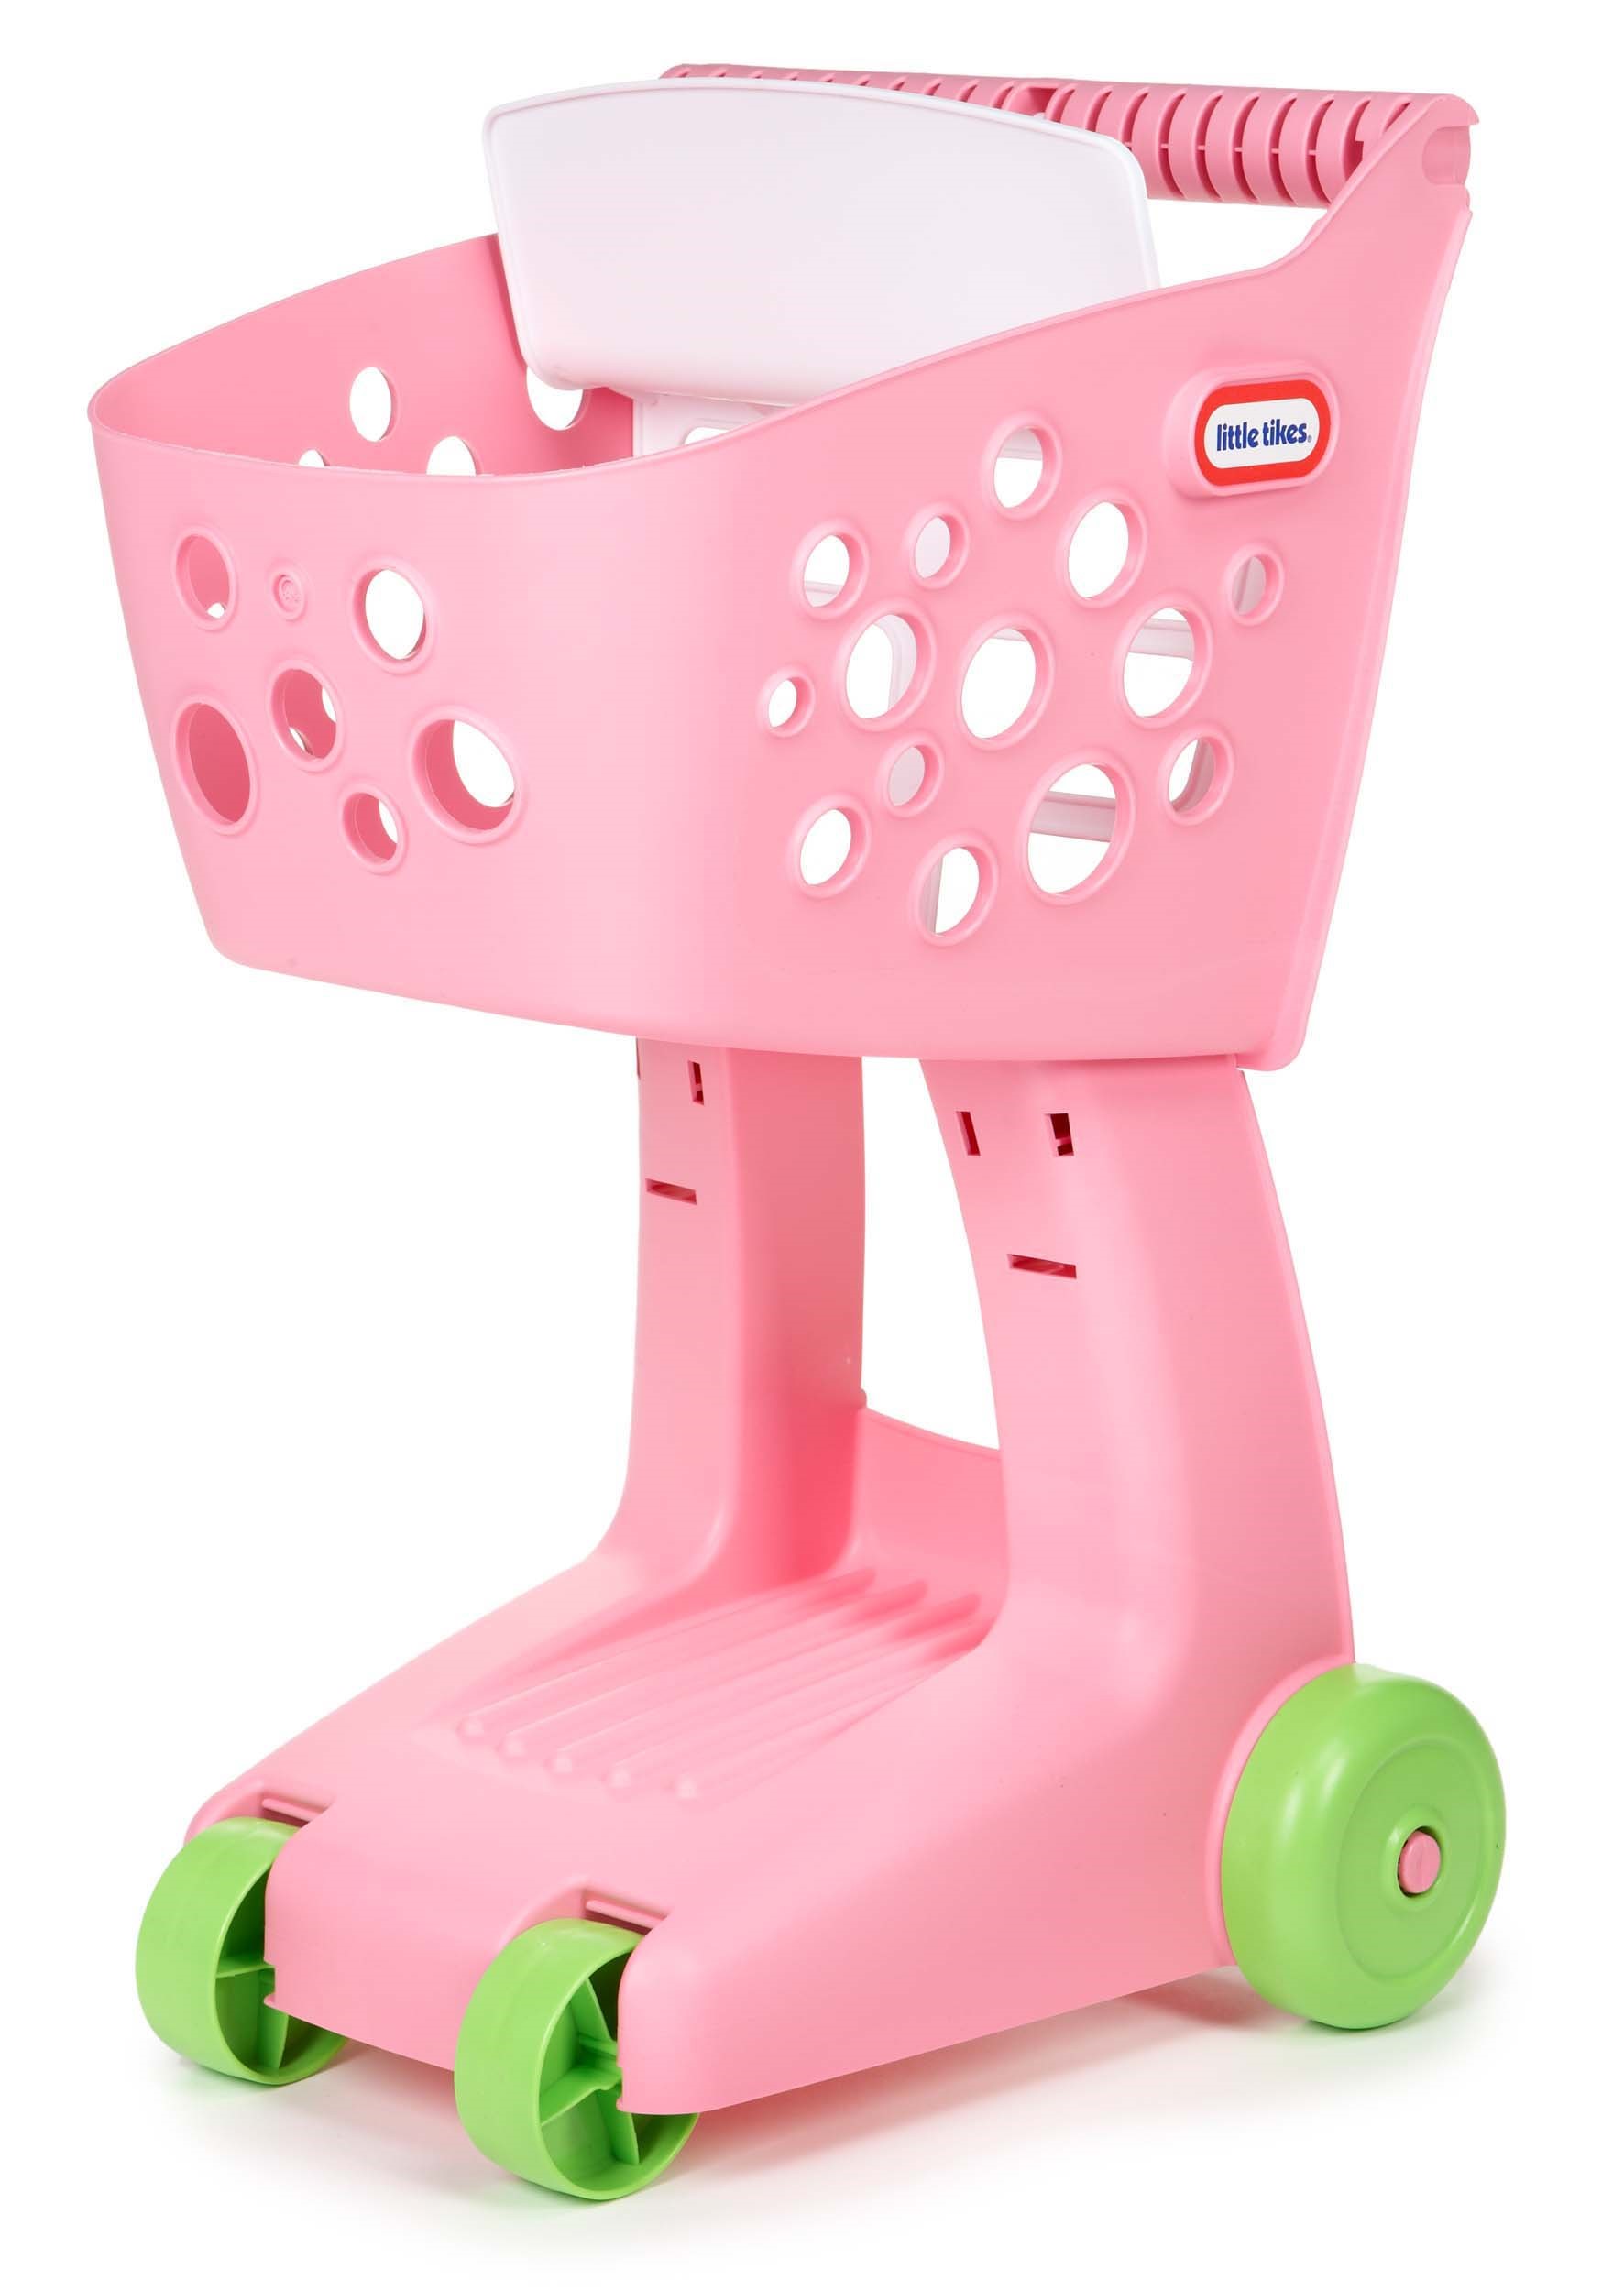 Little Tikes Lil Shopper - Pink For Girls and Boys Ages 1 Year + - image 1 of 7